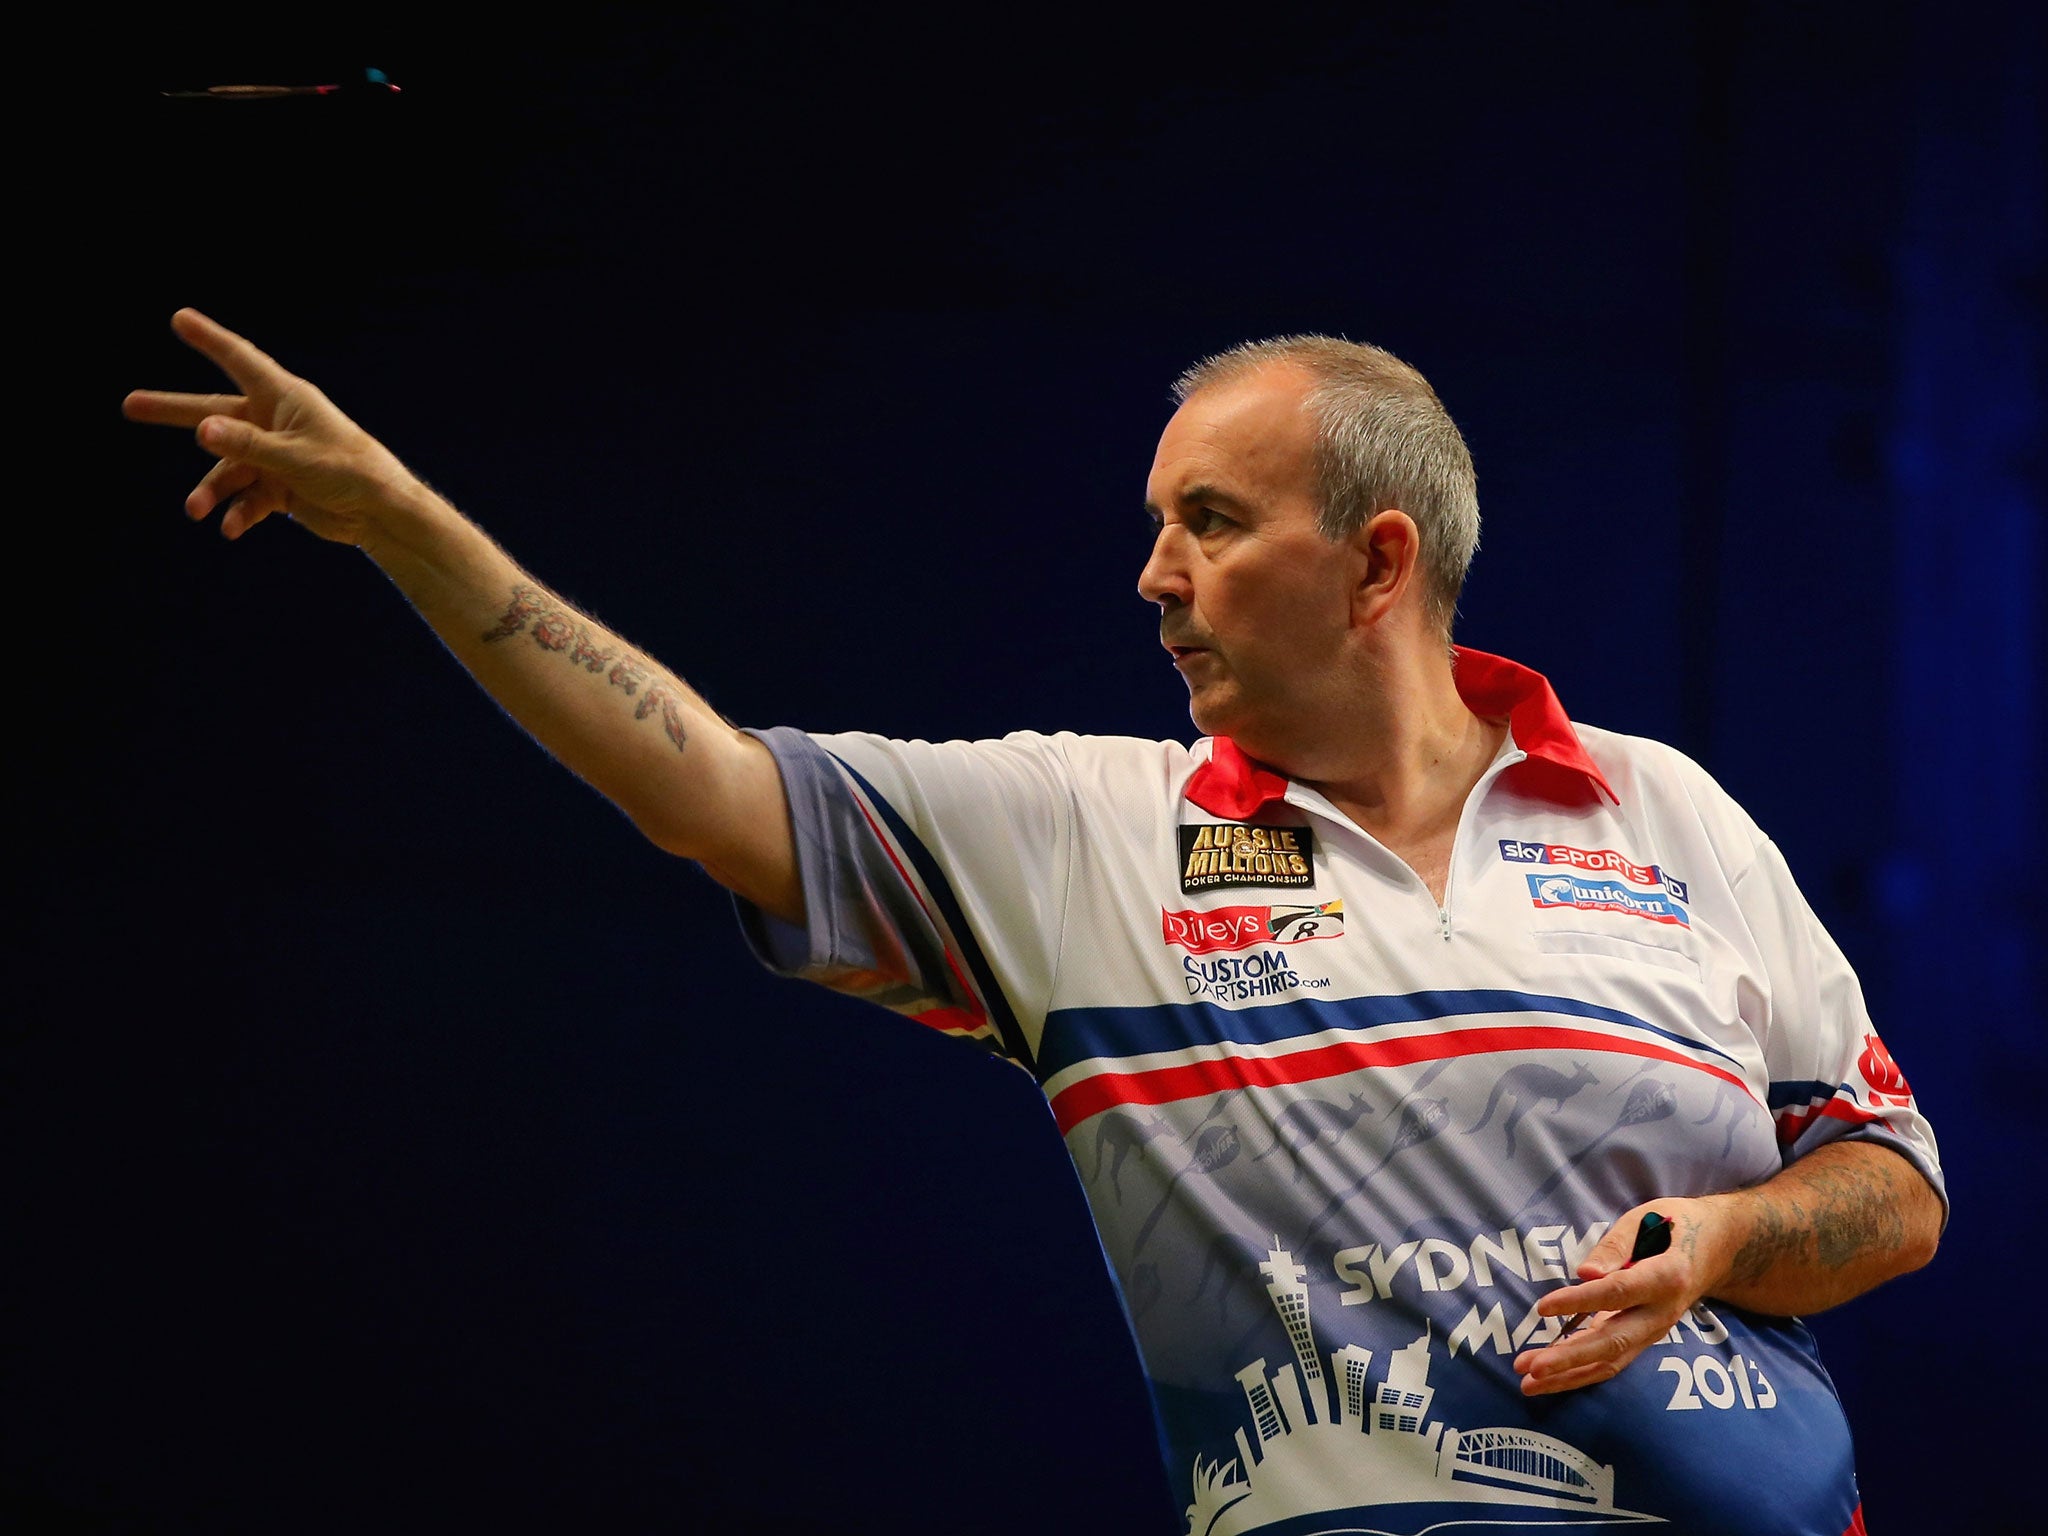 Phil Taylor crushed Dave Chisnall 6-0 in the World Darts Grand Prix